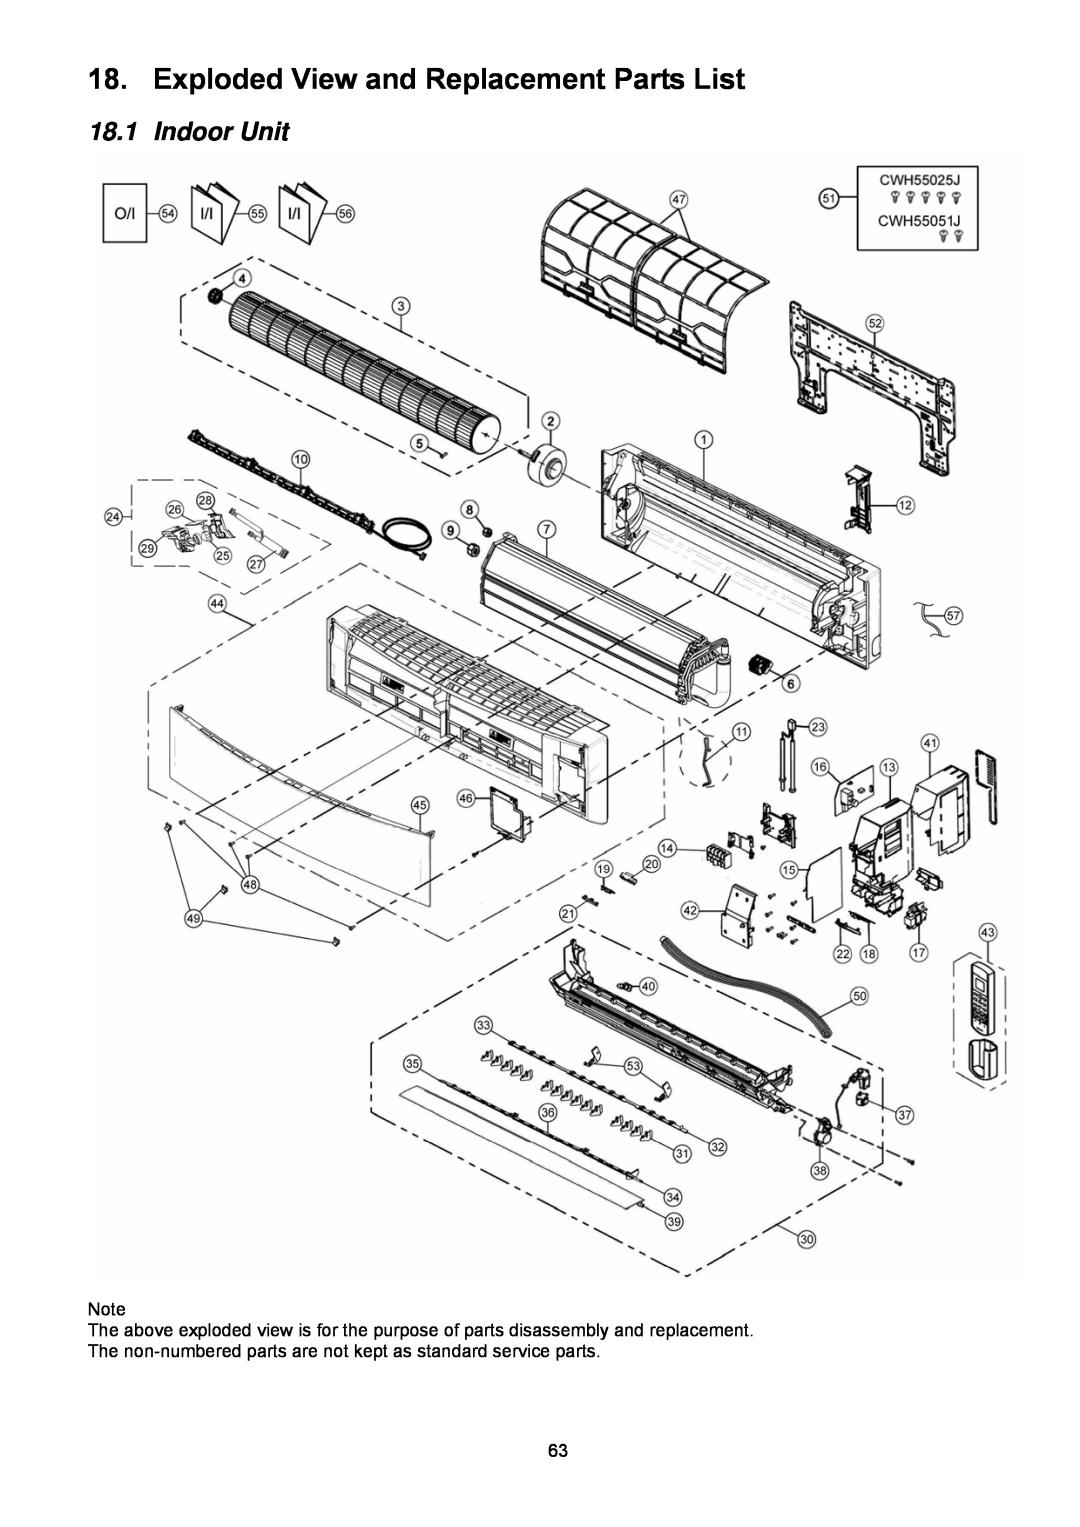 Panasonic CS-C24KKS, CU-C18KKS, CU-C24KKS, CS-C18KKS dimensions Exploded View and Replacement Parts List, Indoor Unit 